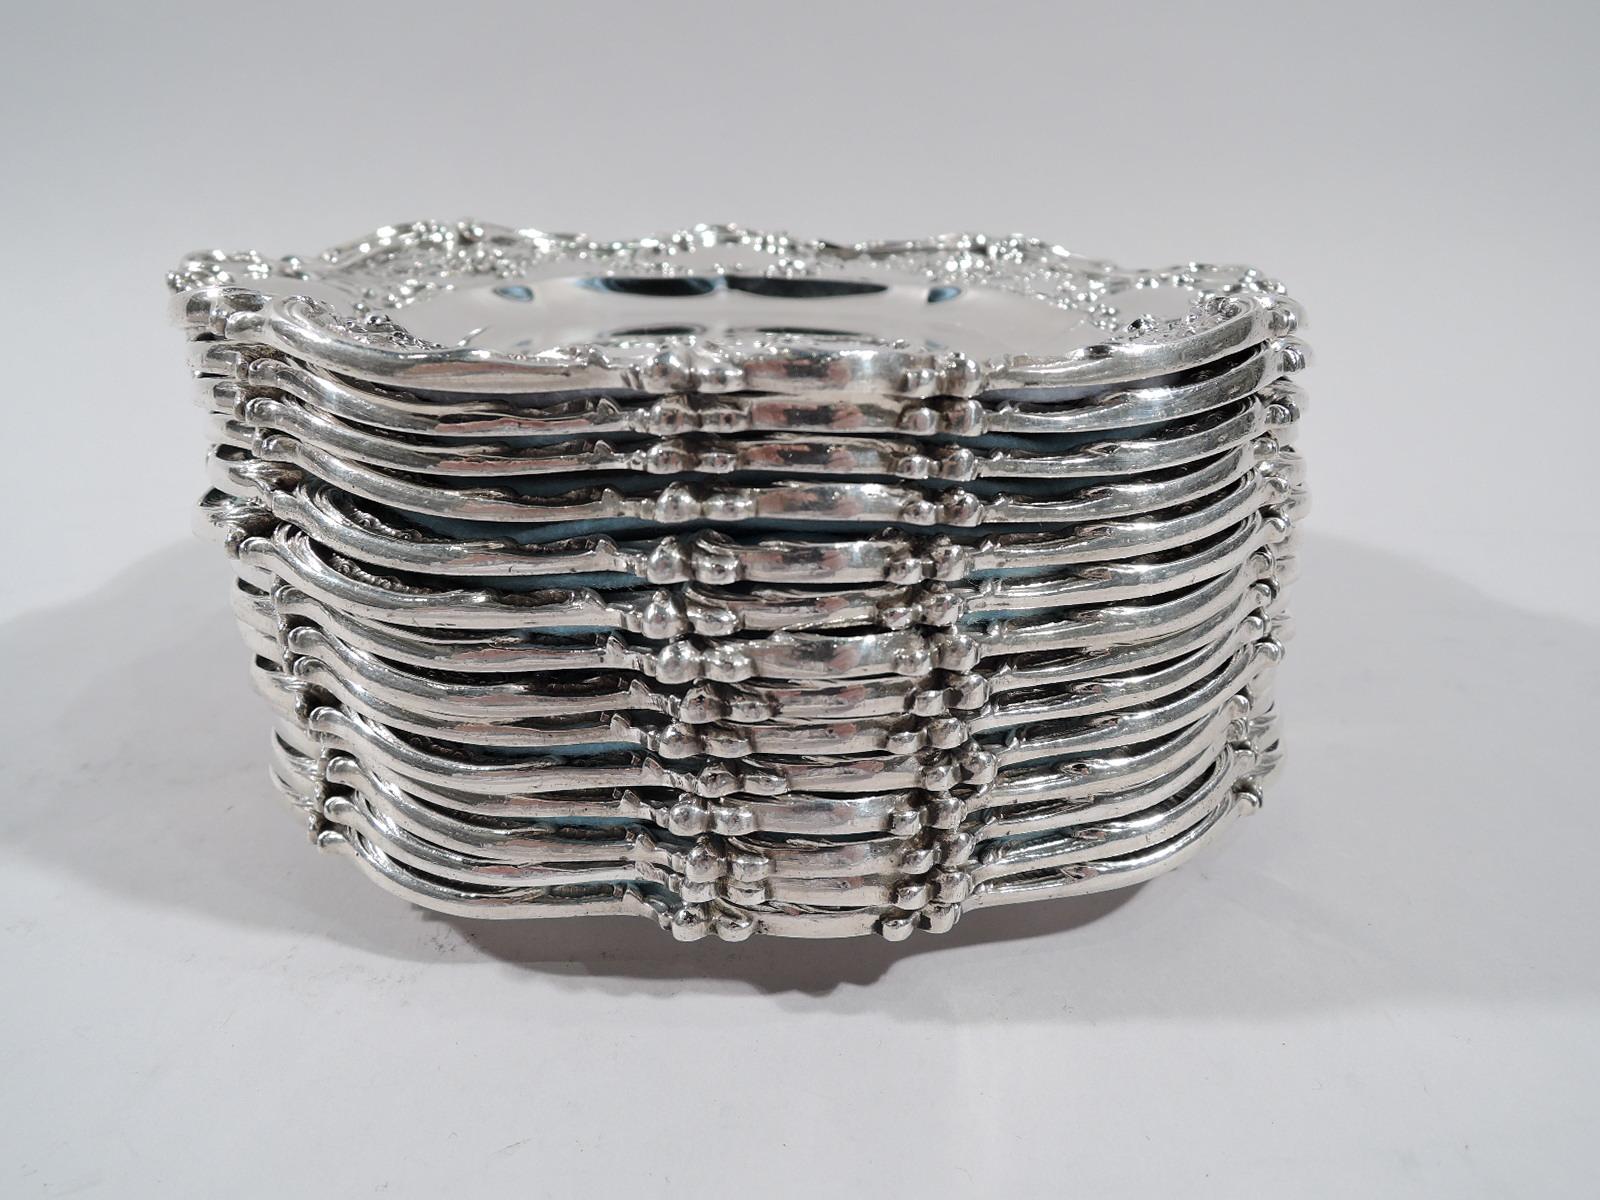 Set of 14 Edwardian Rococo sterling silver bread and butter plates. Made by Gorham in Providence in 1912-1913. Each: Shaped well and scrolled and wavy rim. Shoulder has chased garlands alternating with scrolled frames (vacant). Fully marked